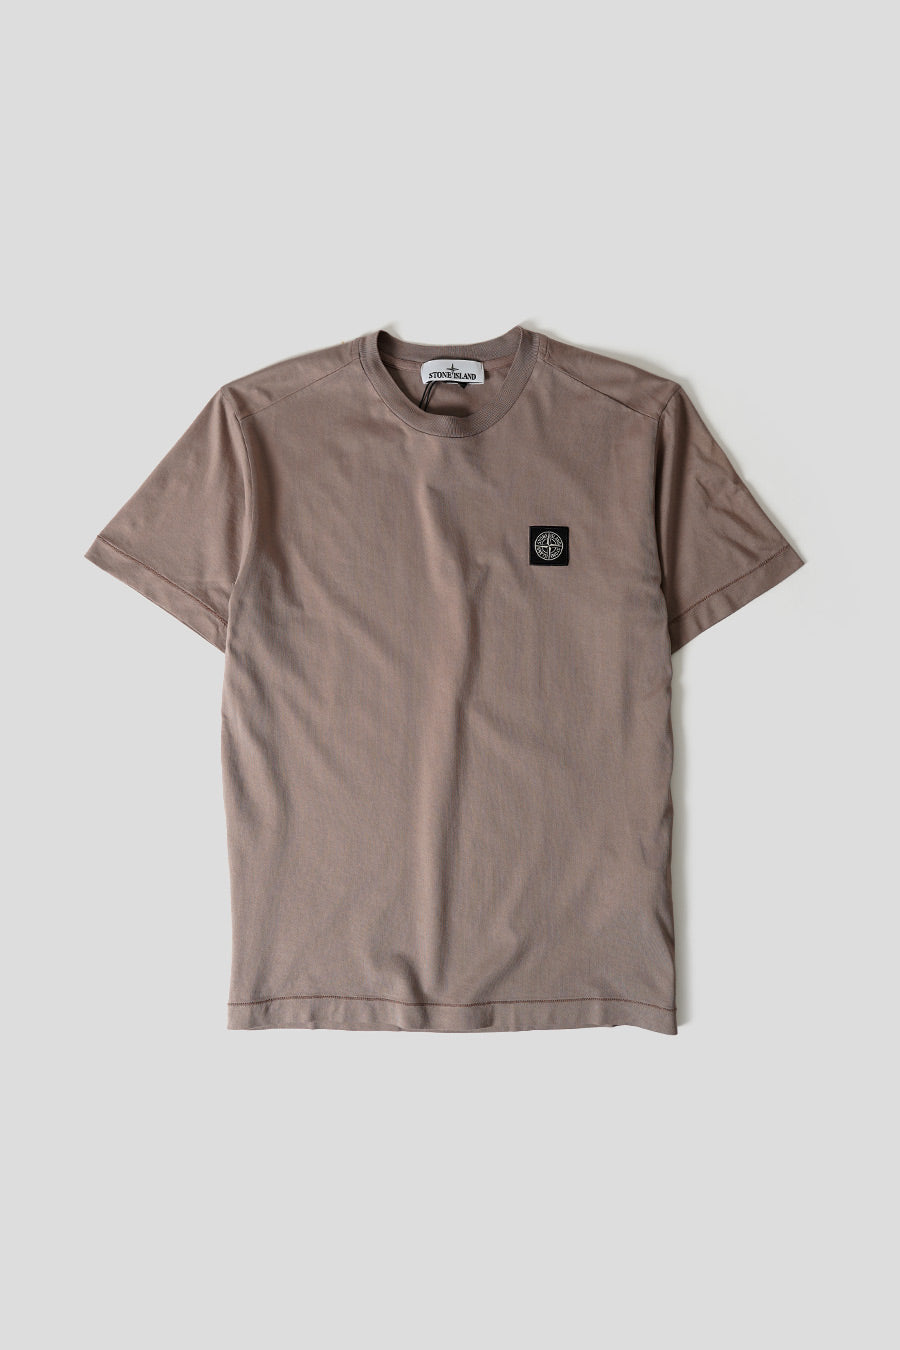 Stone Island - TAUPE PATCH T-SHIRT - LE LABO STORE